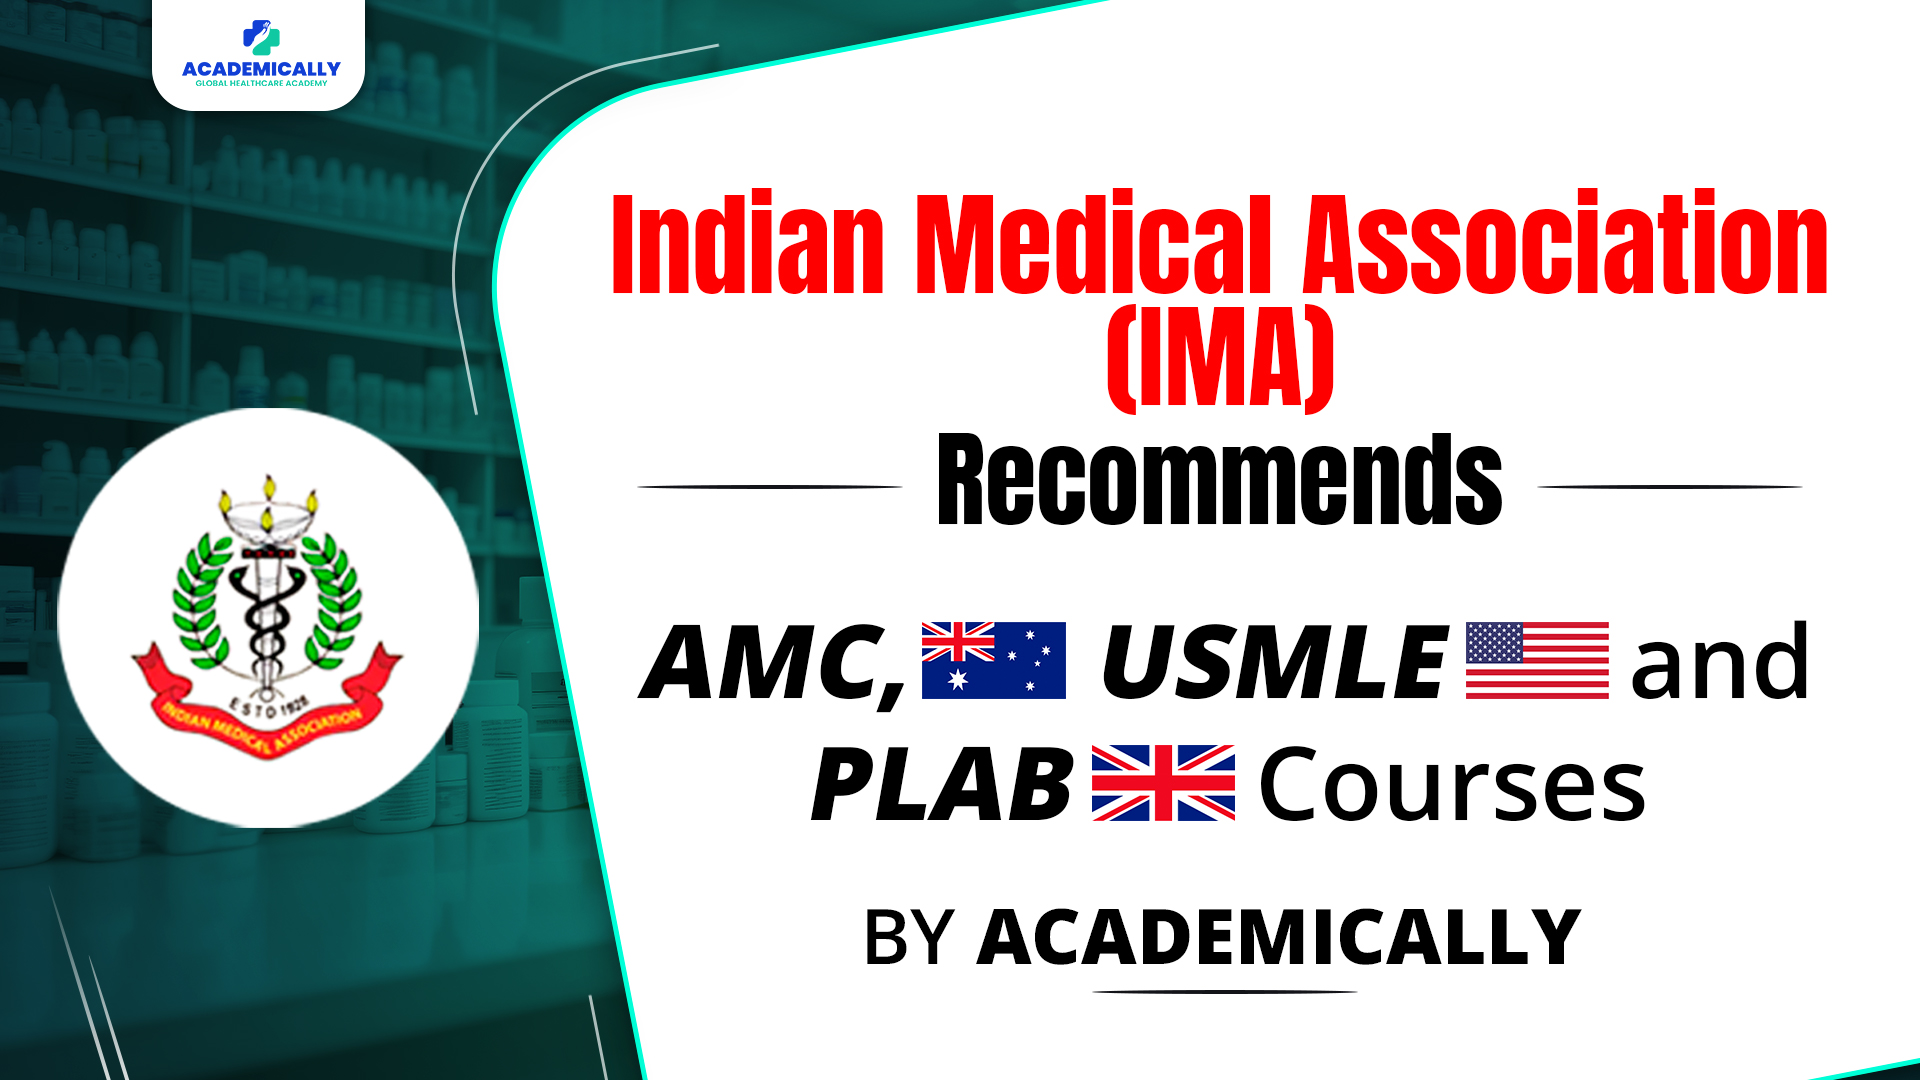 IMA Recommends AMC, USMLE and PLAB Courses